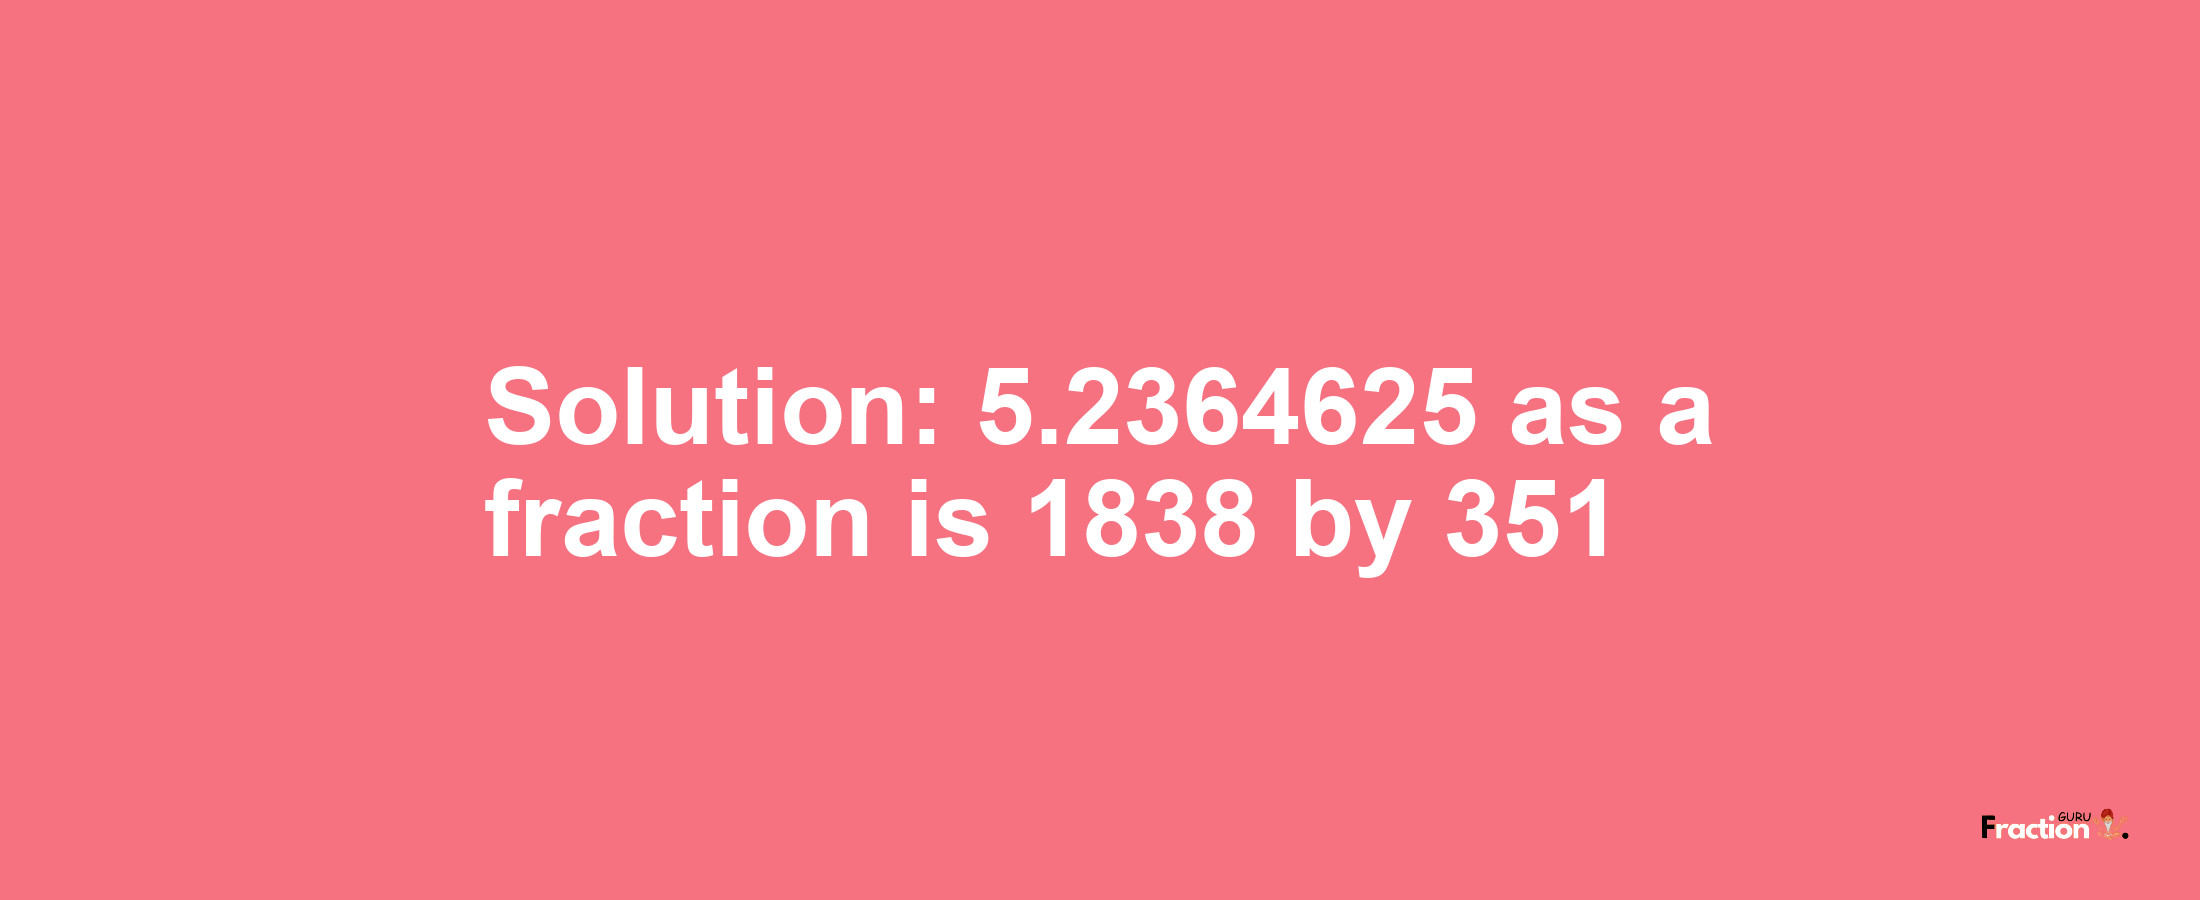 Solution:5.2364625 as a fraction is 1838/351